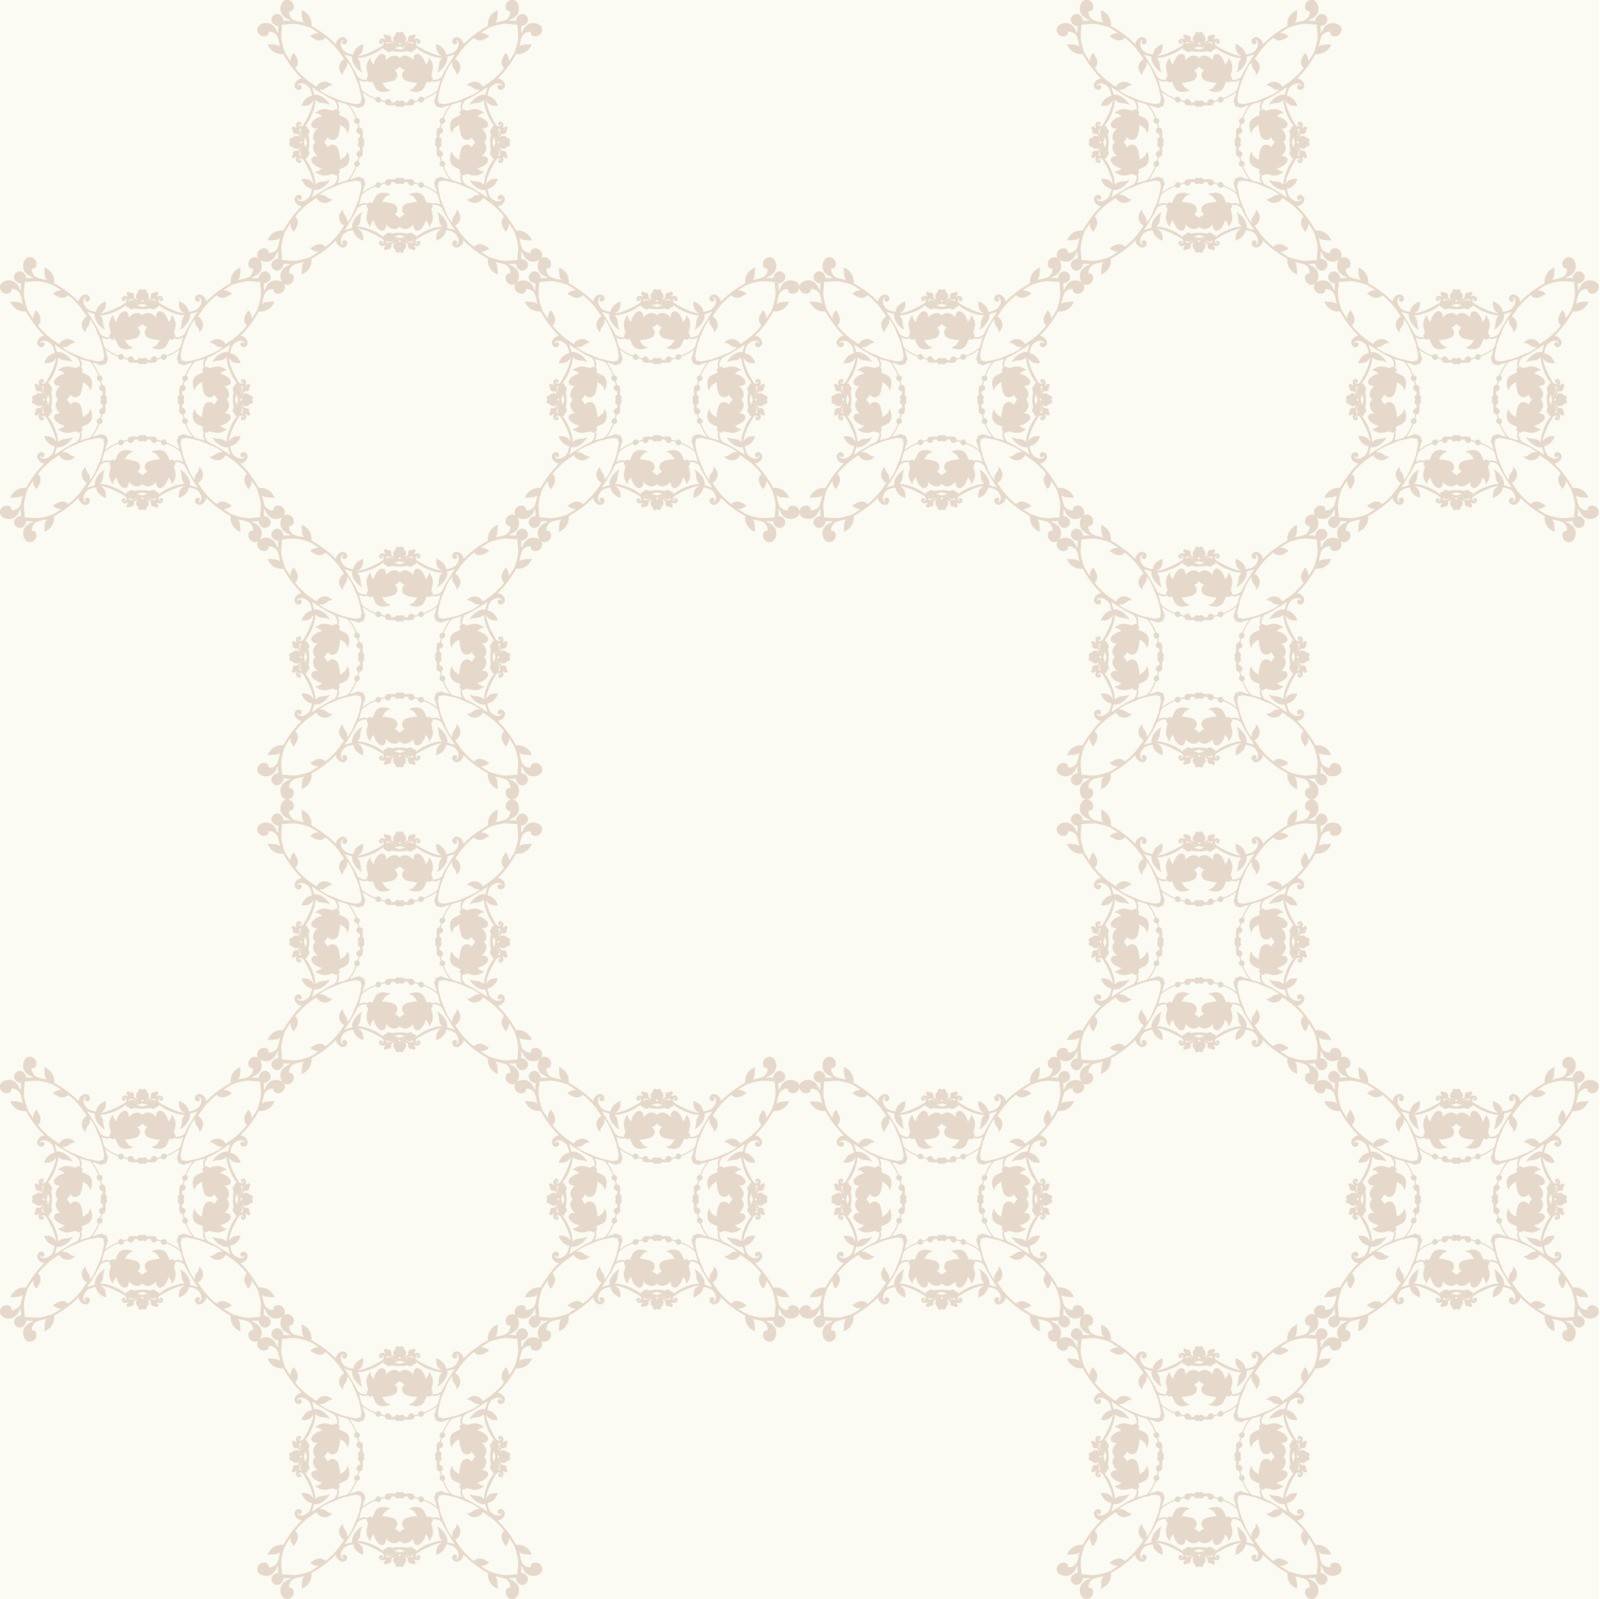 neutral floral background. swirl and curve by LittleCuckoo